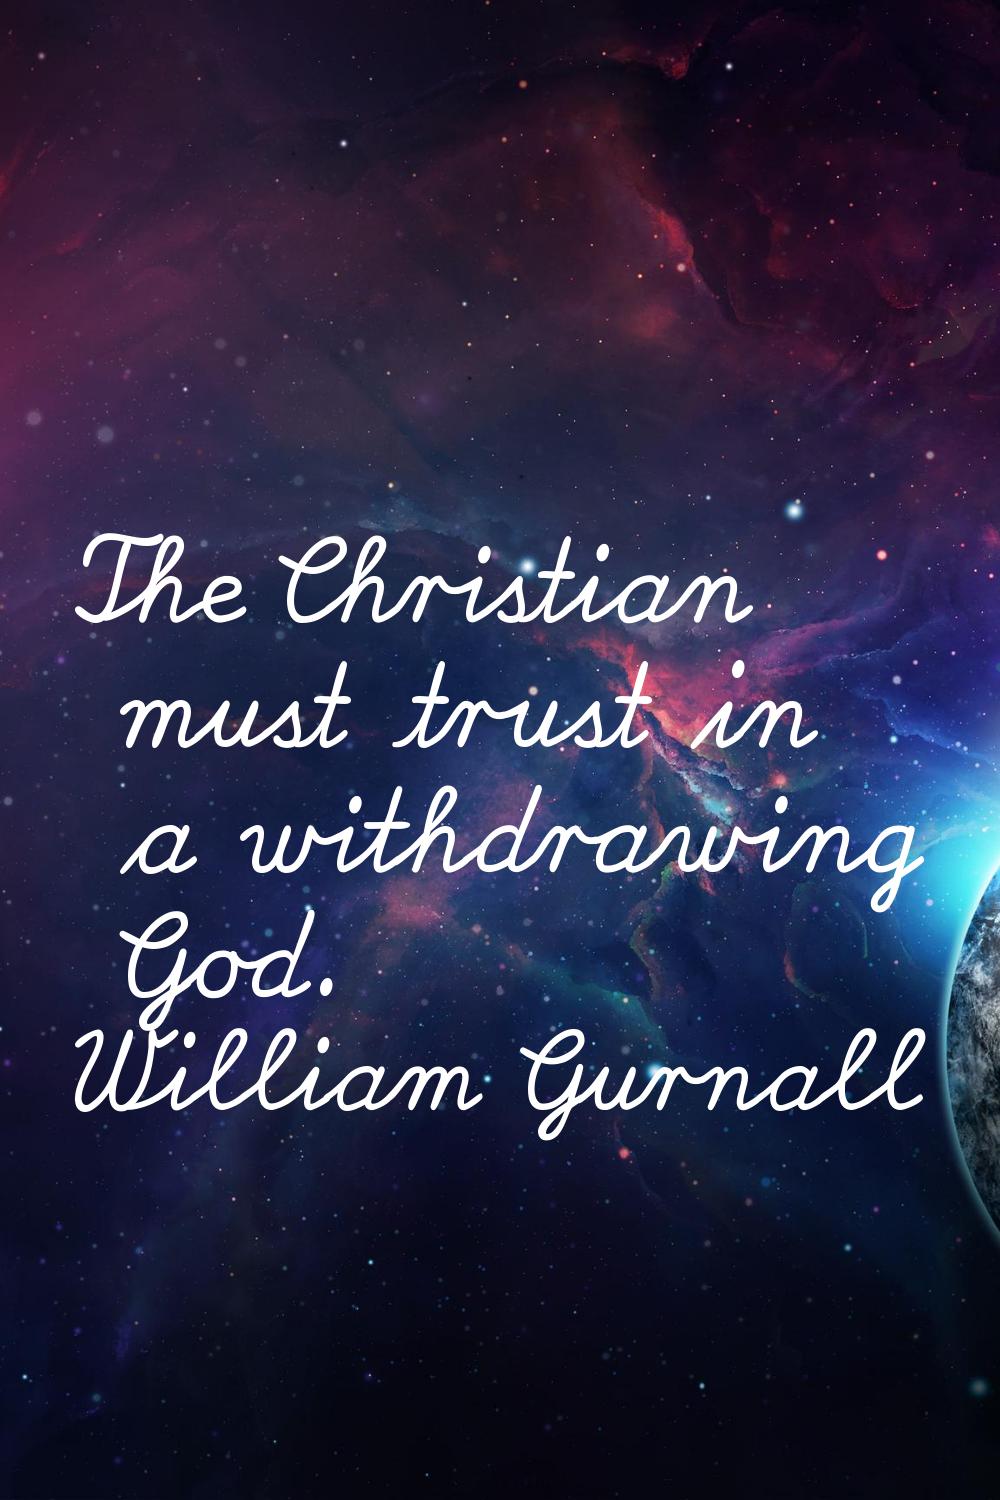 The Christian must trust in a withdrawing God.